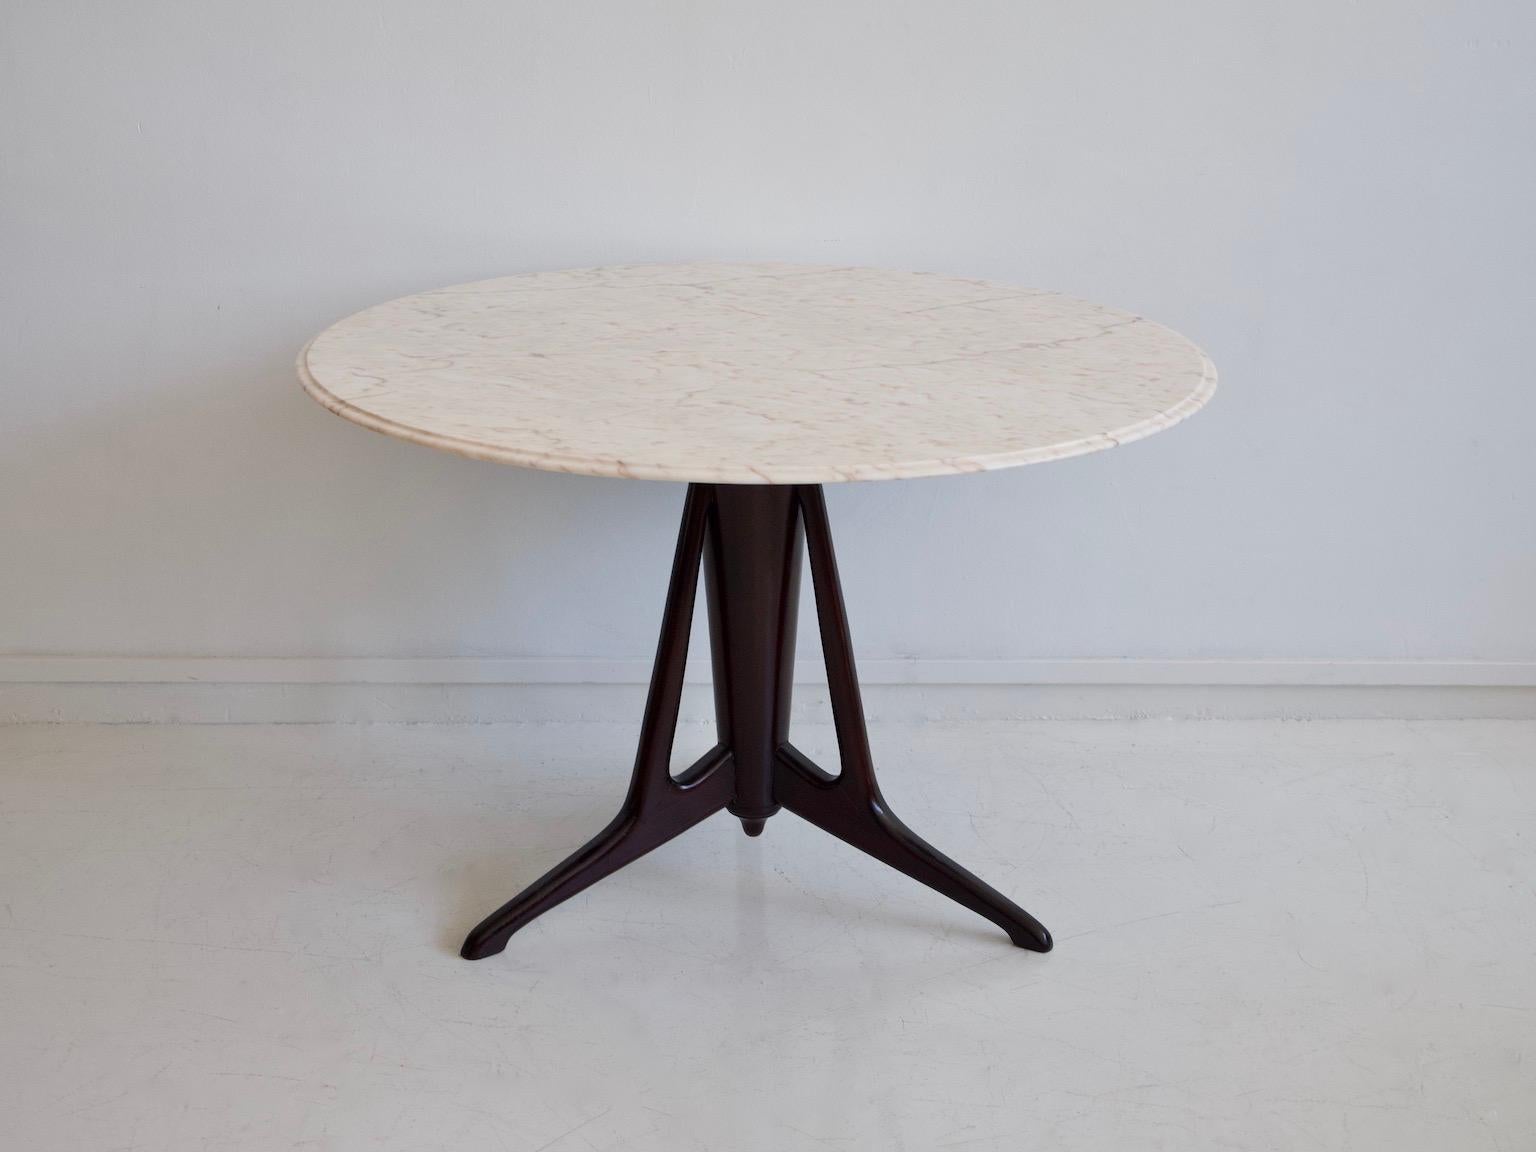 Round ebonized mahogany dining table with marble top attributed to Ico Parisi. Manufactured in Italy in the 1950s.